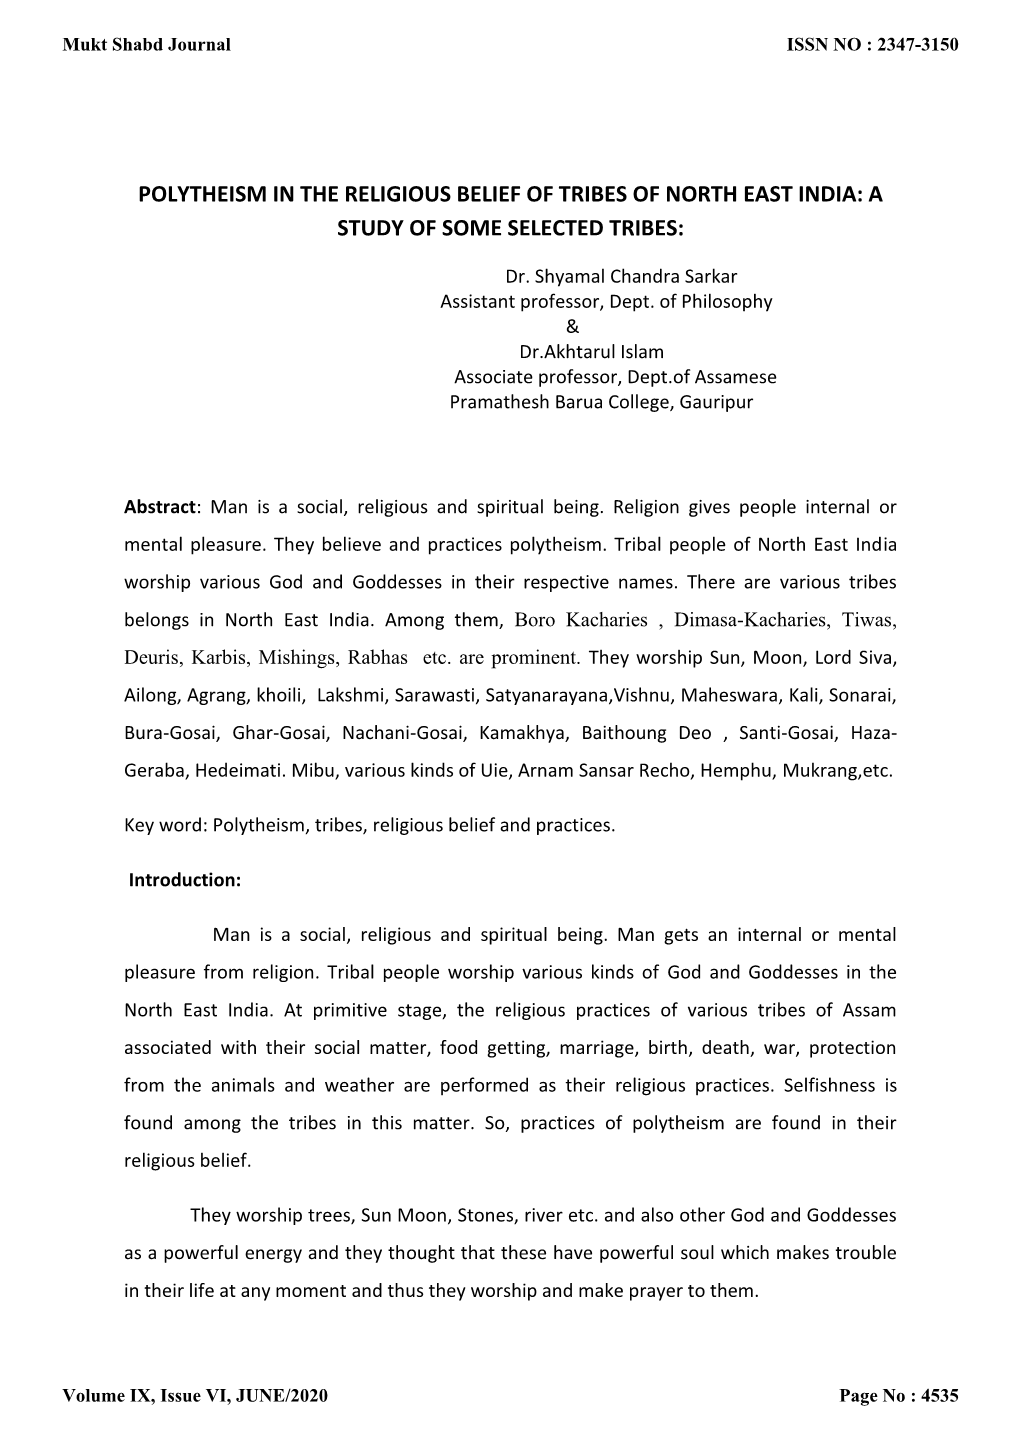 Polytheism in the Religious Belief of Tribes of North East India: a Study of Some Selected Tribes